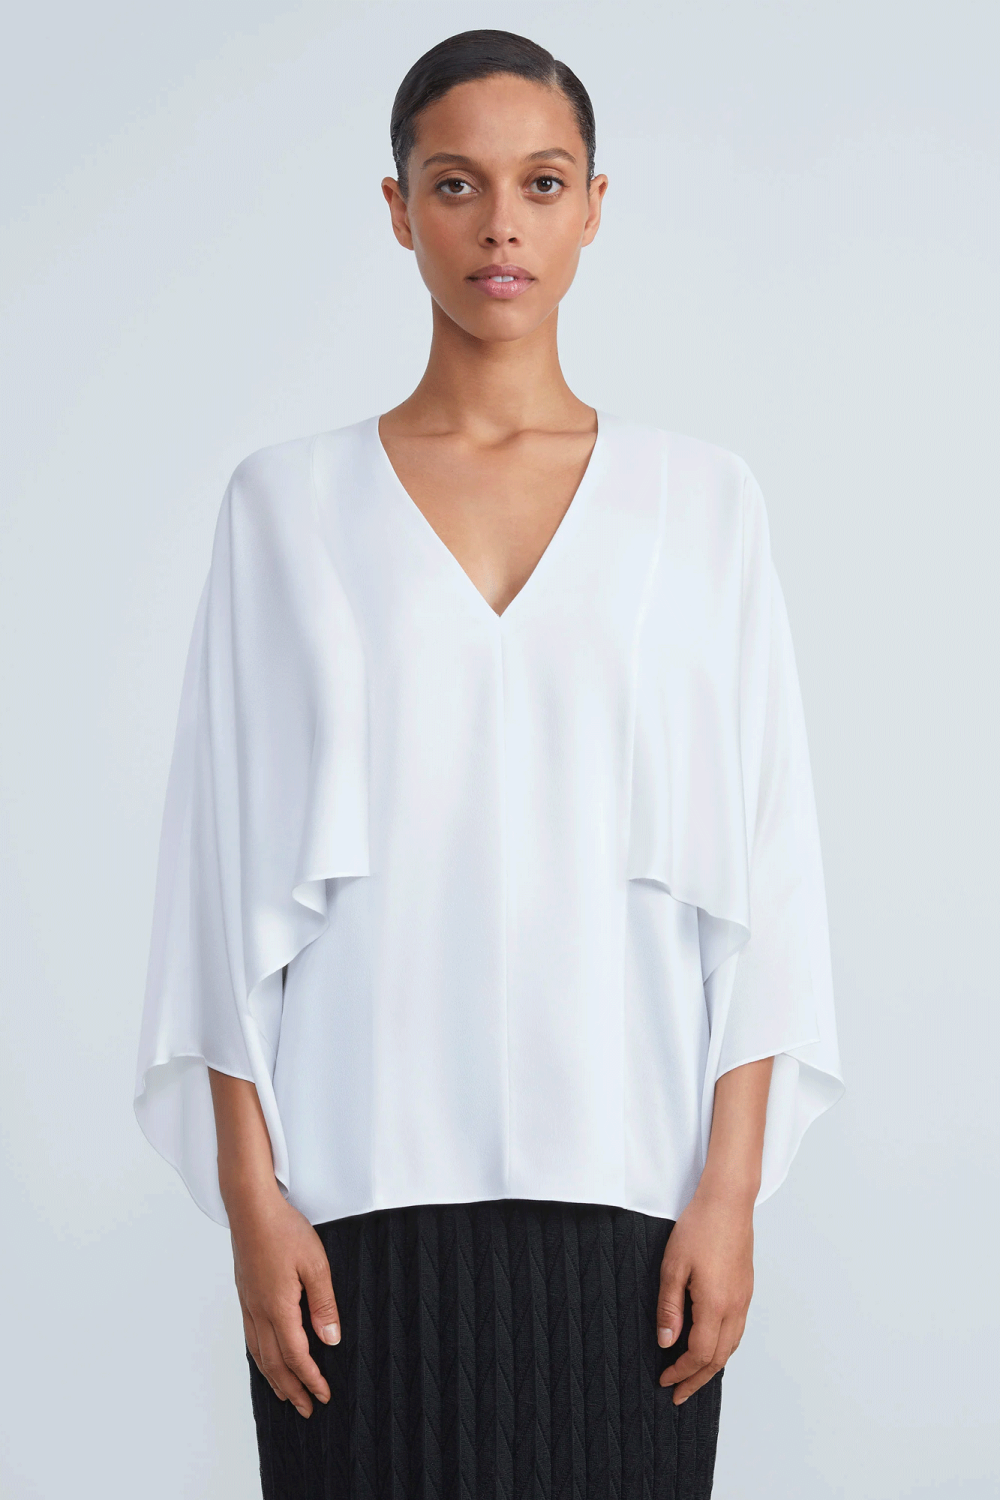 This beautiful long V-neck blouse from Lafayette 148 is crafted from light, lustrous satin